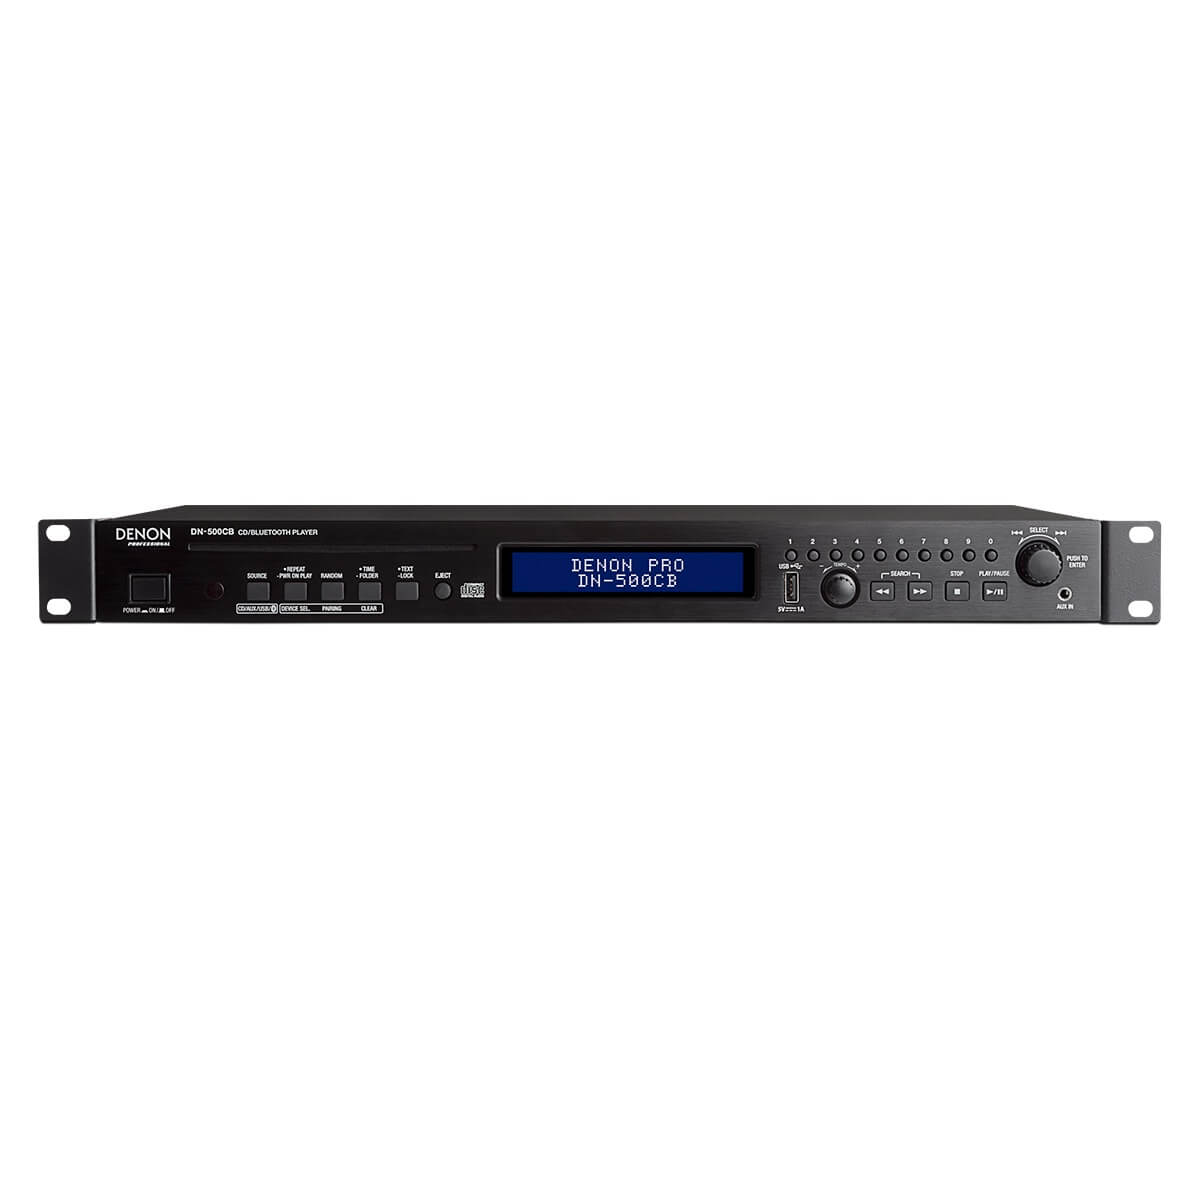 Denon DN-500CB CD Player with Bluetooth, USB and AUX inputs, front